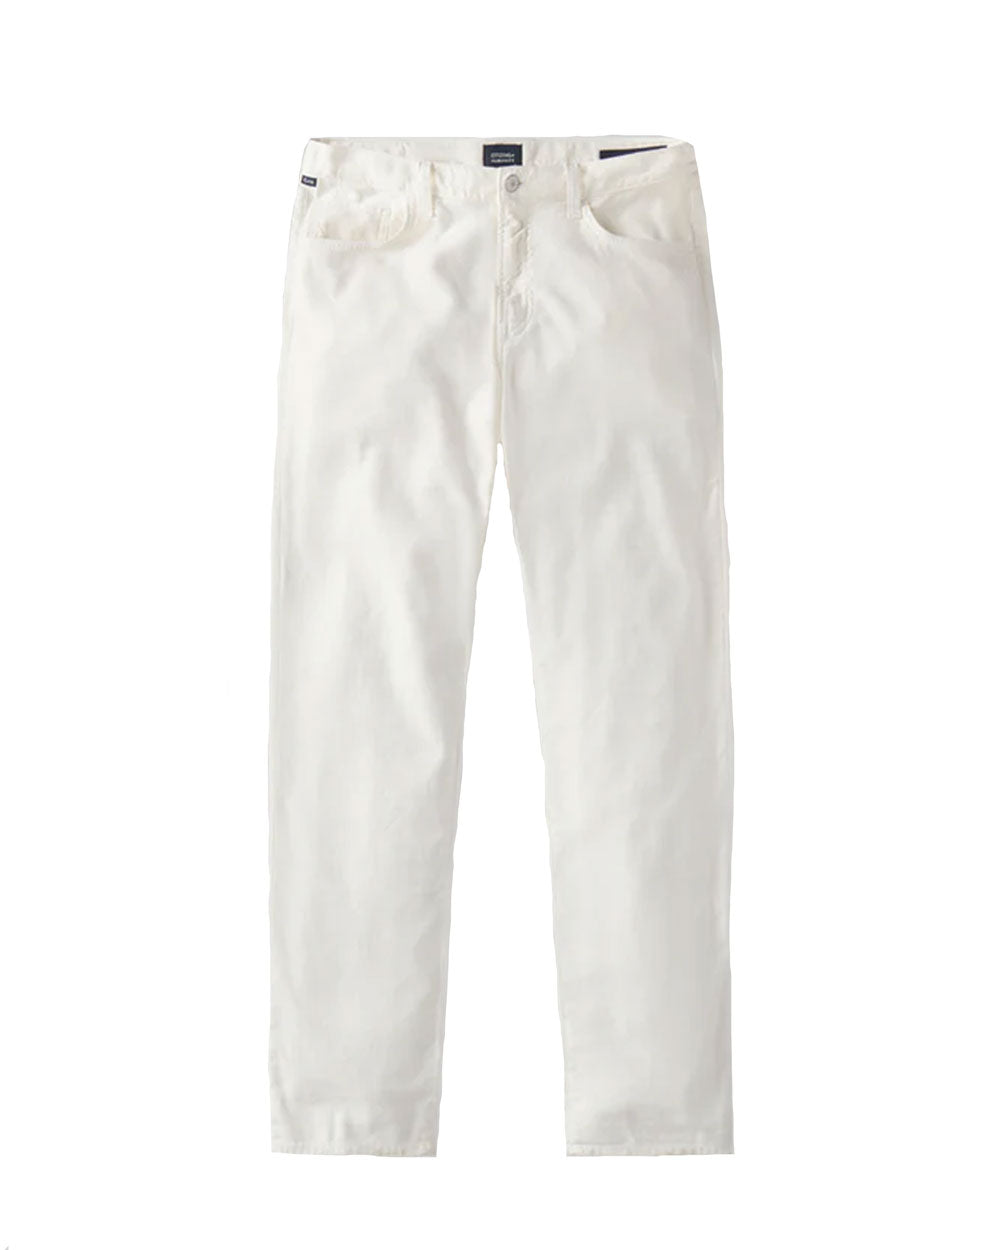 The Gage Stretch Linen Pant in Sierra